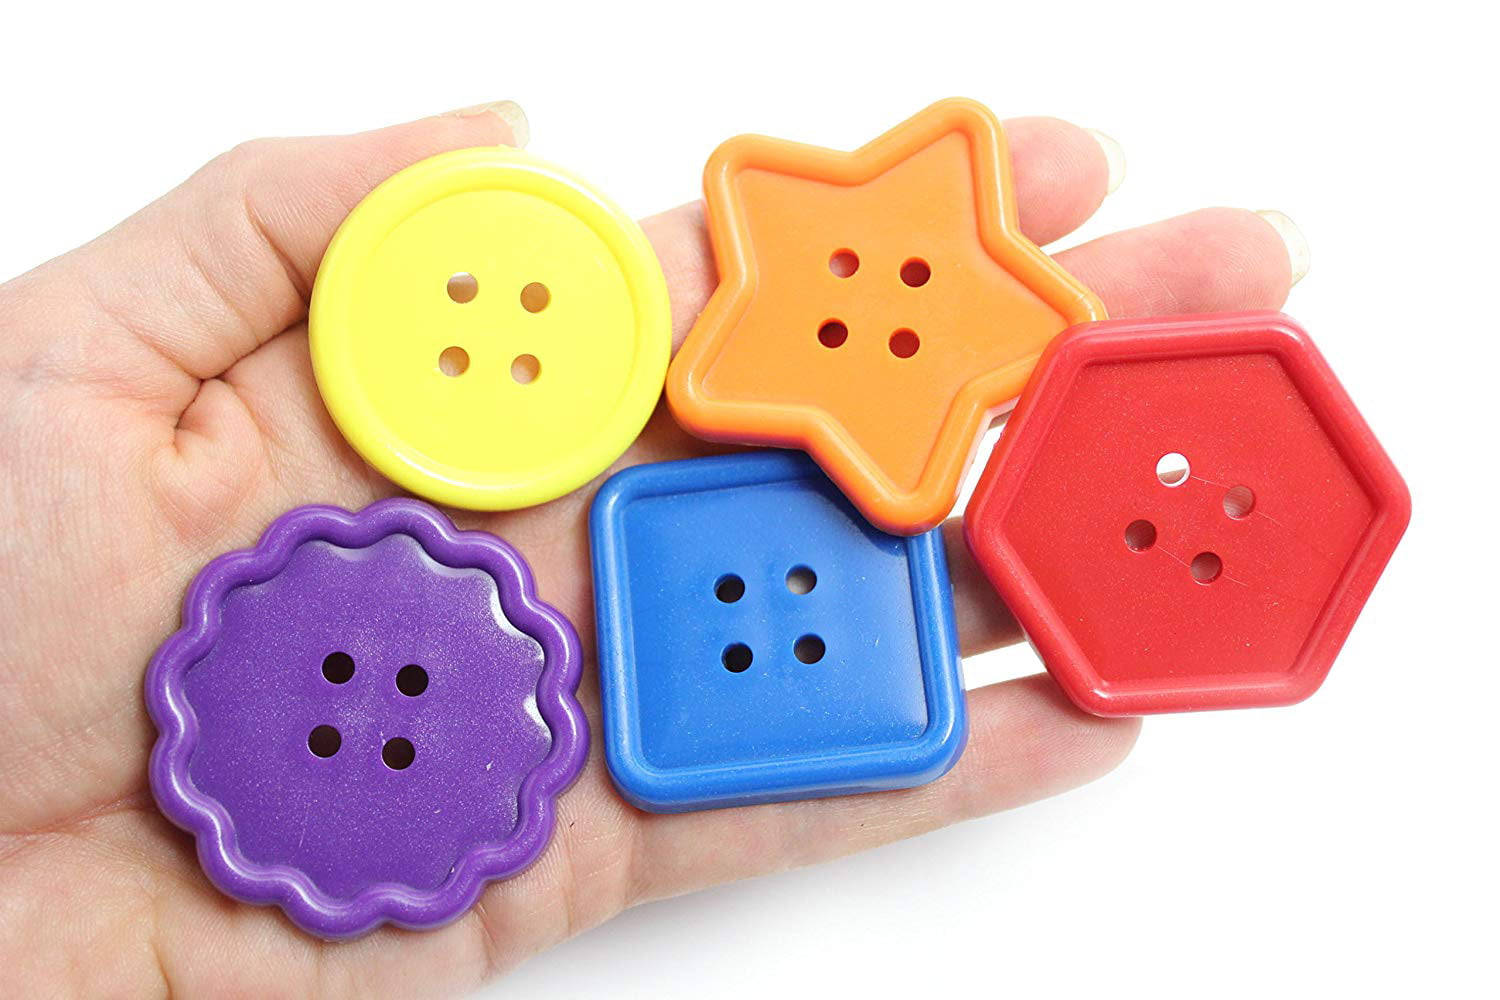 Primary Buttons Large Plastic For Children's Crafts, Toys, Clothing - Set